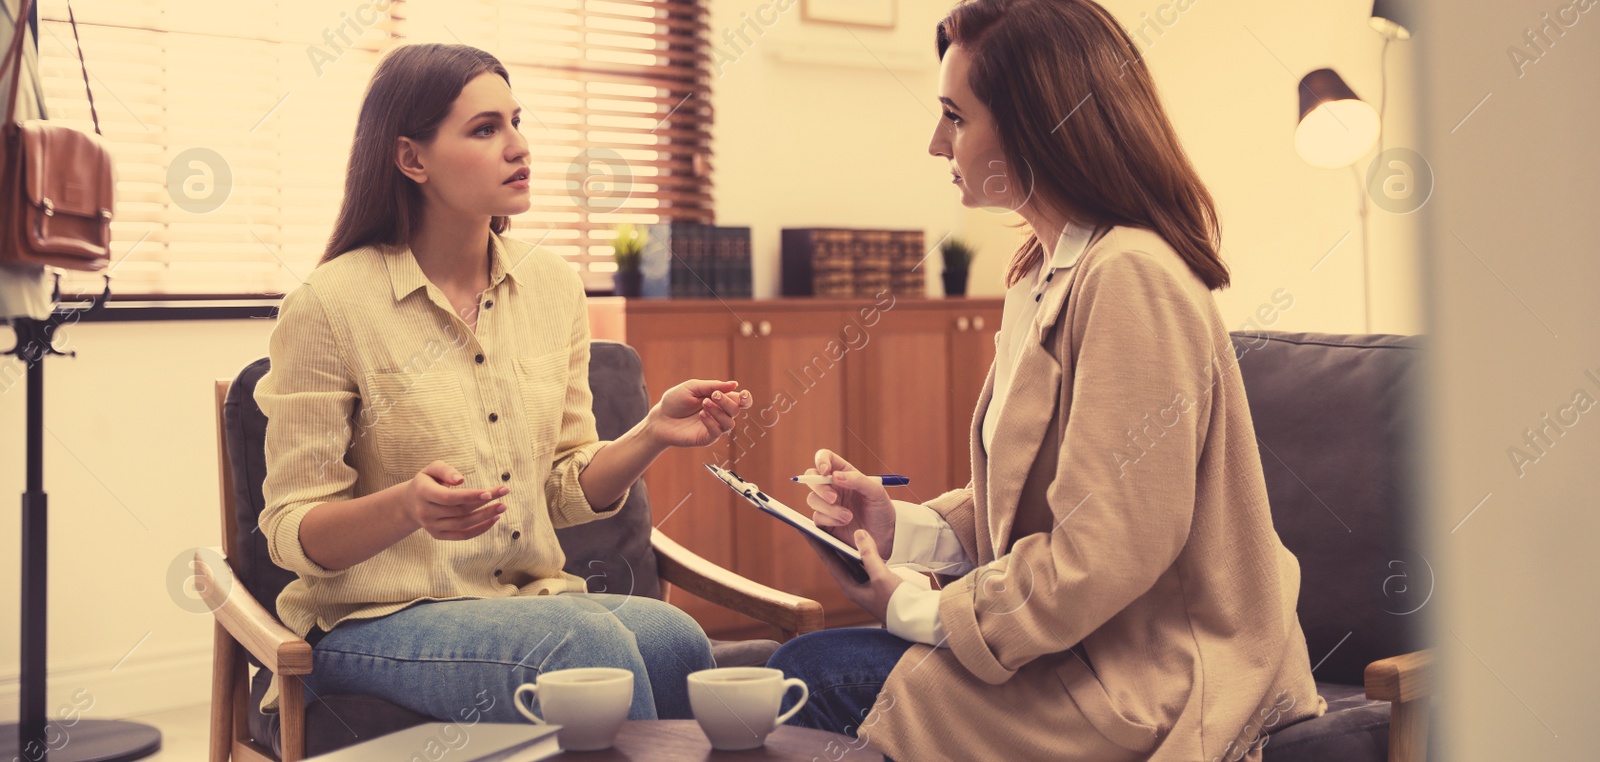 Image of Professional psychotherapist working with patient in office. Banner design